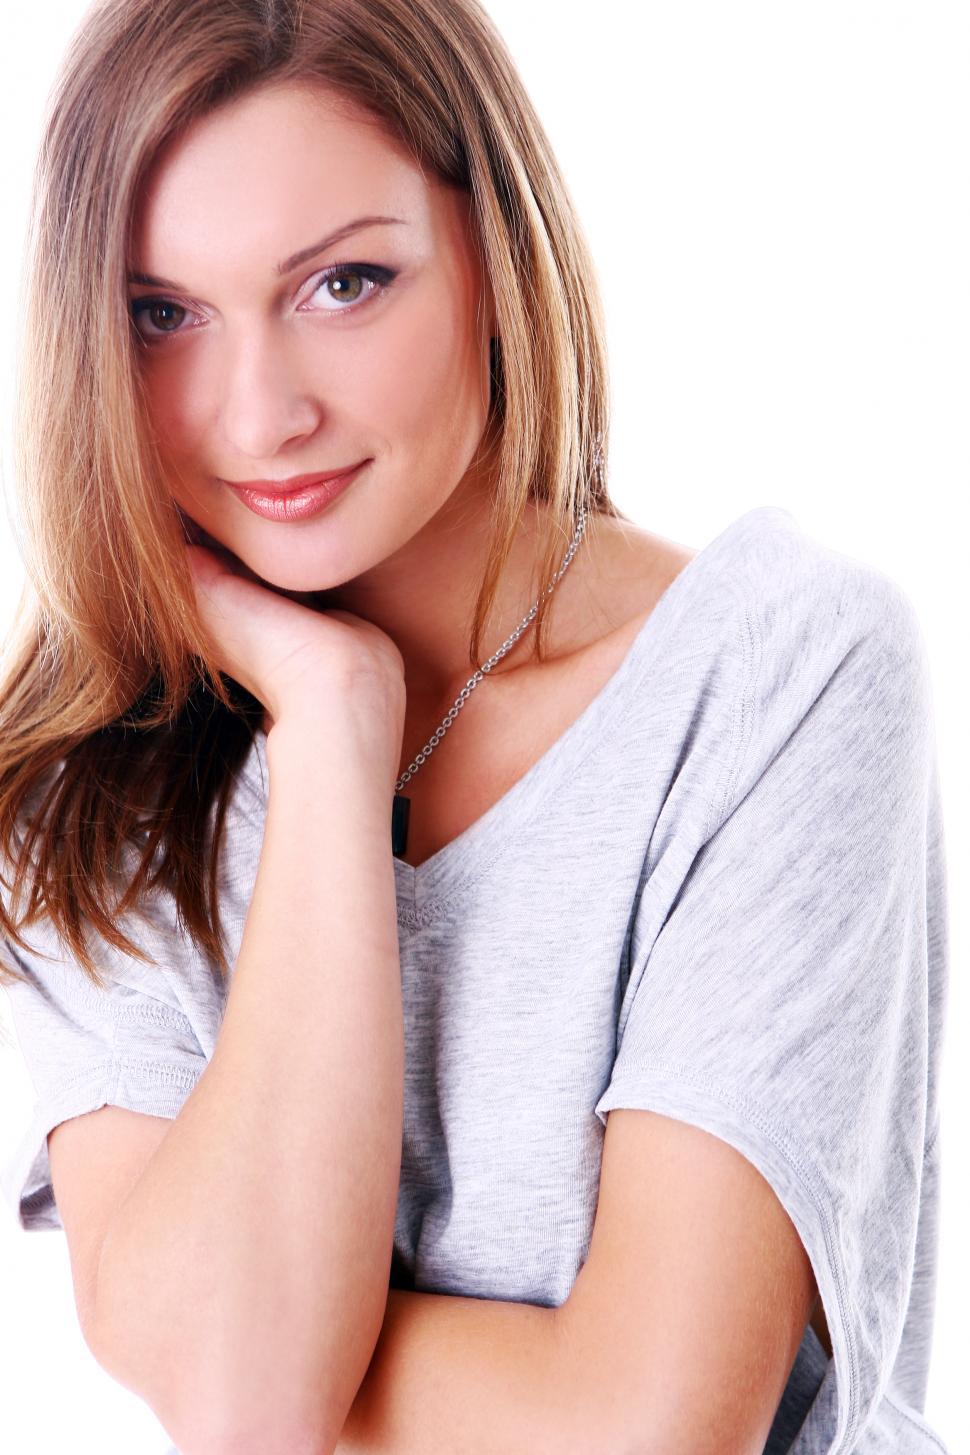 Free Image of Portrait of cute young woman looking at camera, smiling against white backgr 